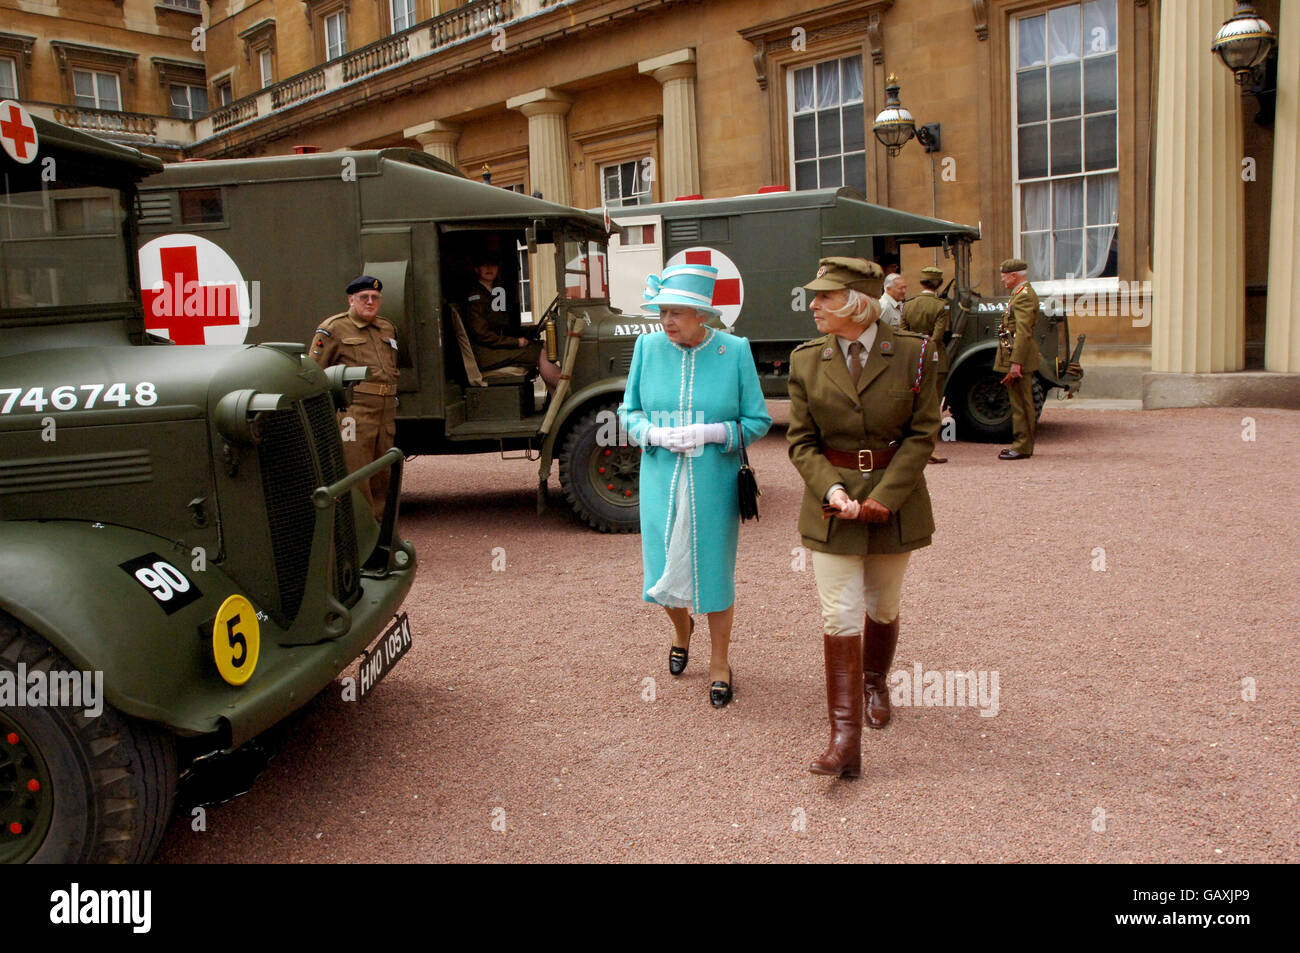 Britain's Queen Elizabeth II, inspects vintage vehicles used by the First Aid Nursing Yeomanry during WWII, which were assembled in the quadrangle of Buckingham Palace, London. Stock Photo